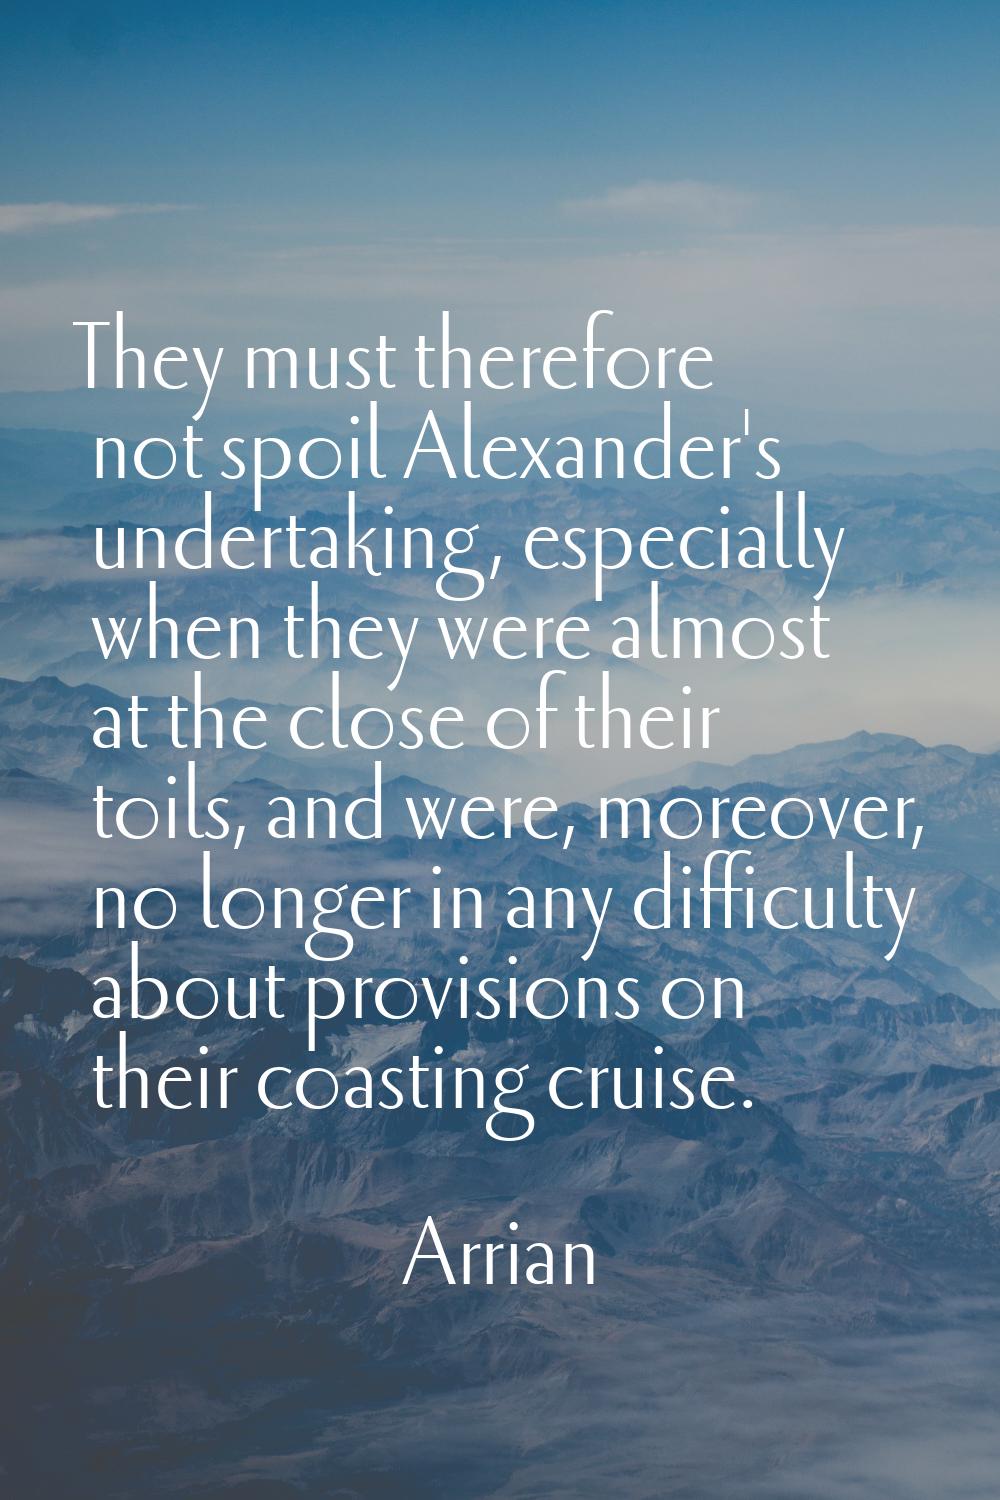 They must therefore not spoil Alexander's undertaking, especially when they were almost at the clos